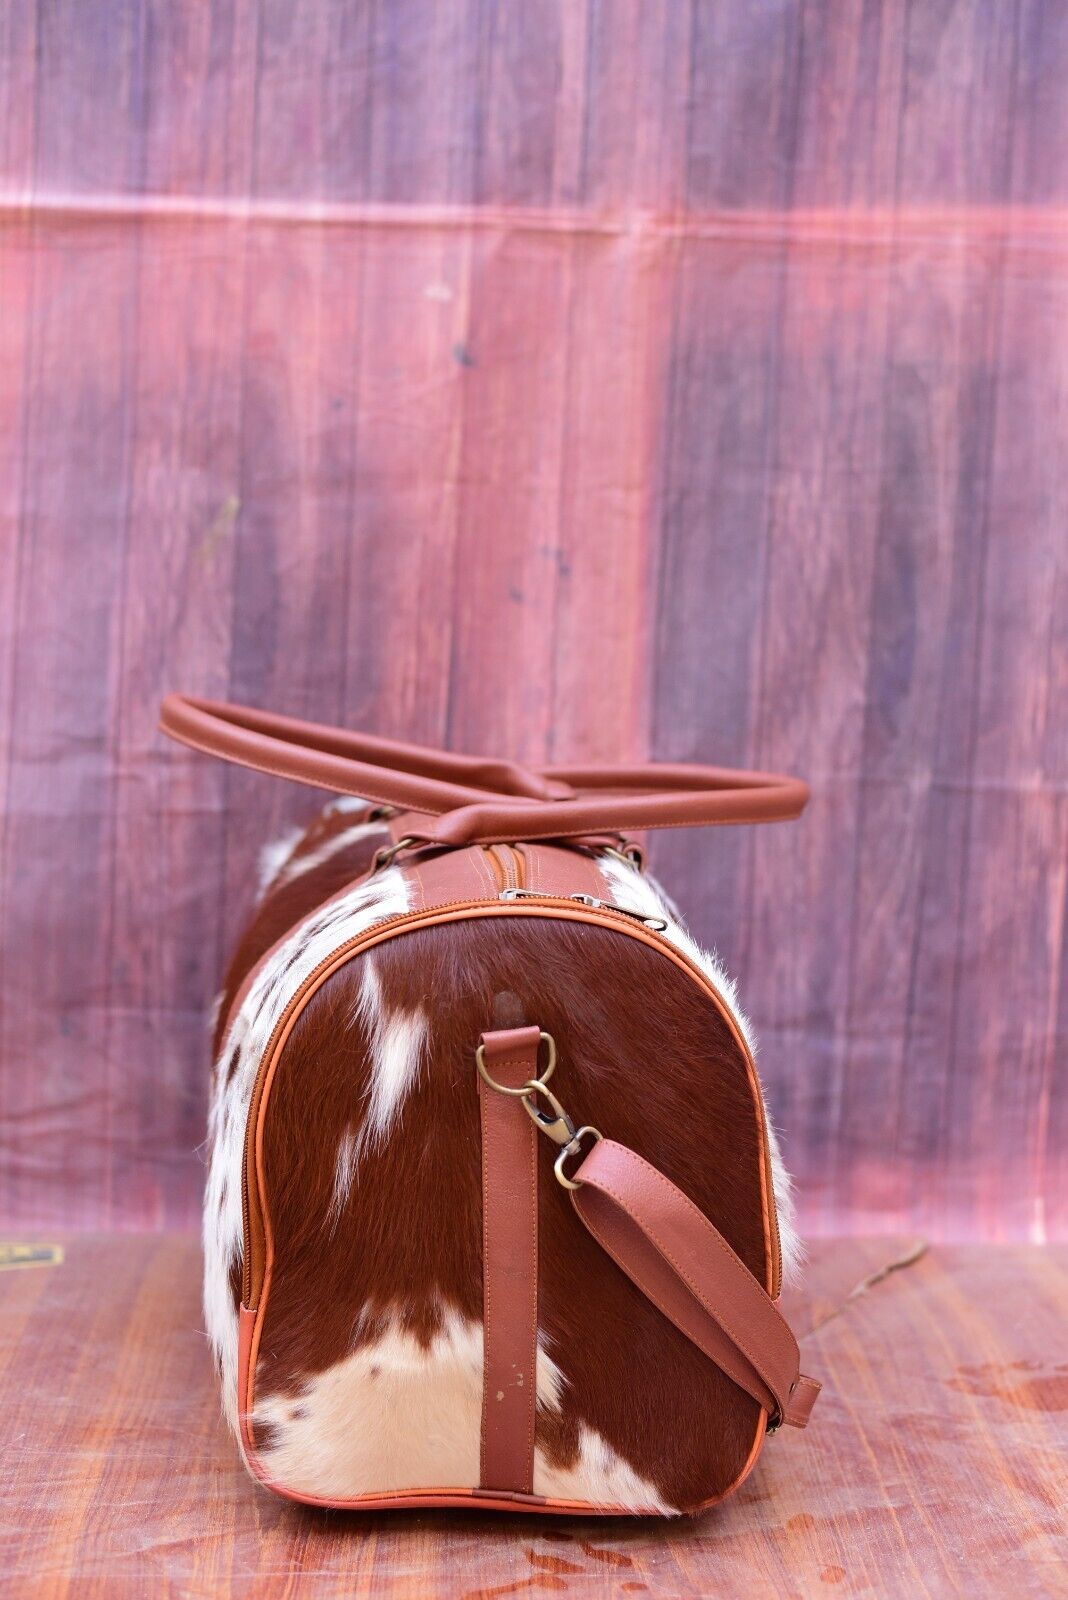 Rugged, handcrafted cowhide weekender. Southern style for trips, gym, rodeo. Built to last.